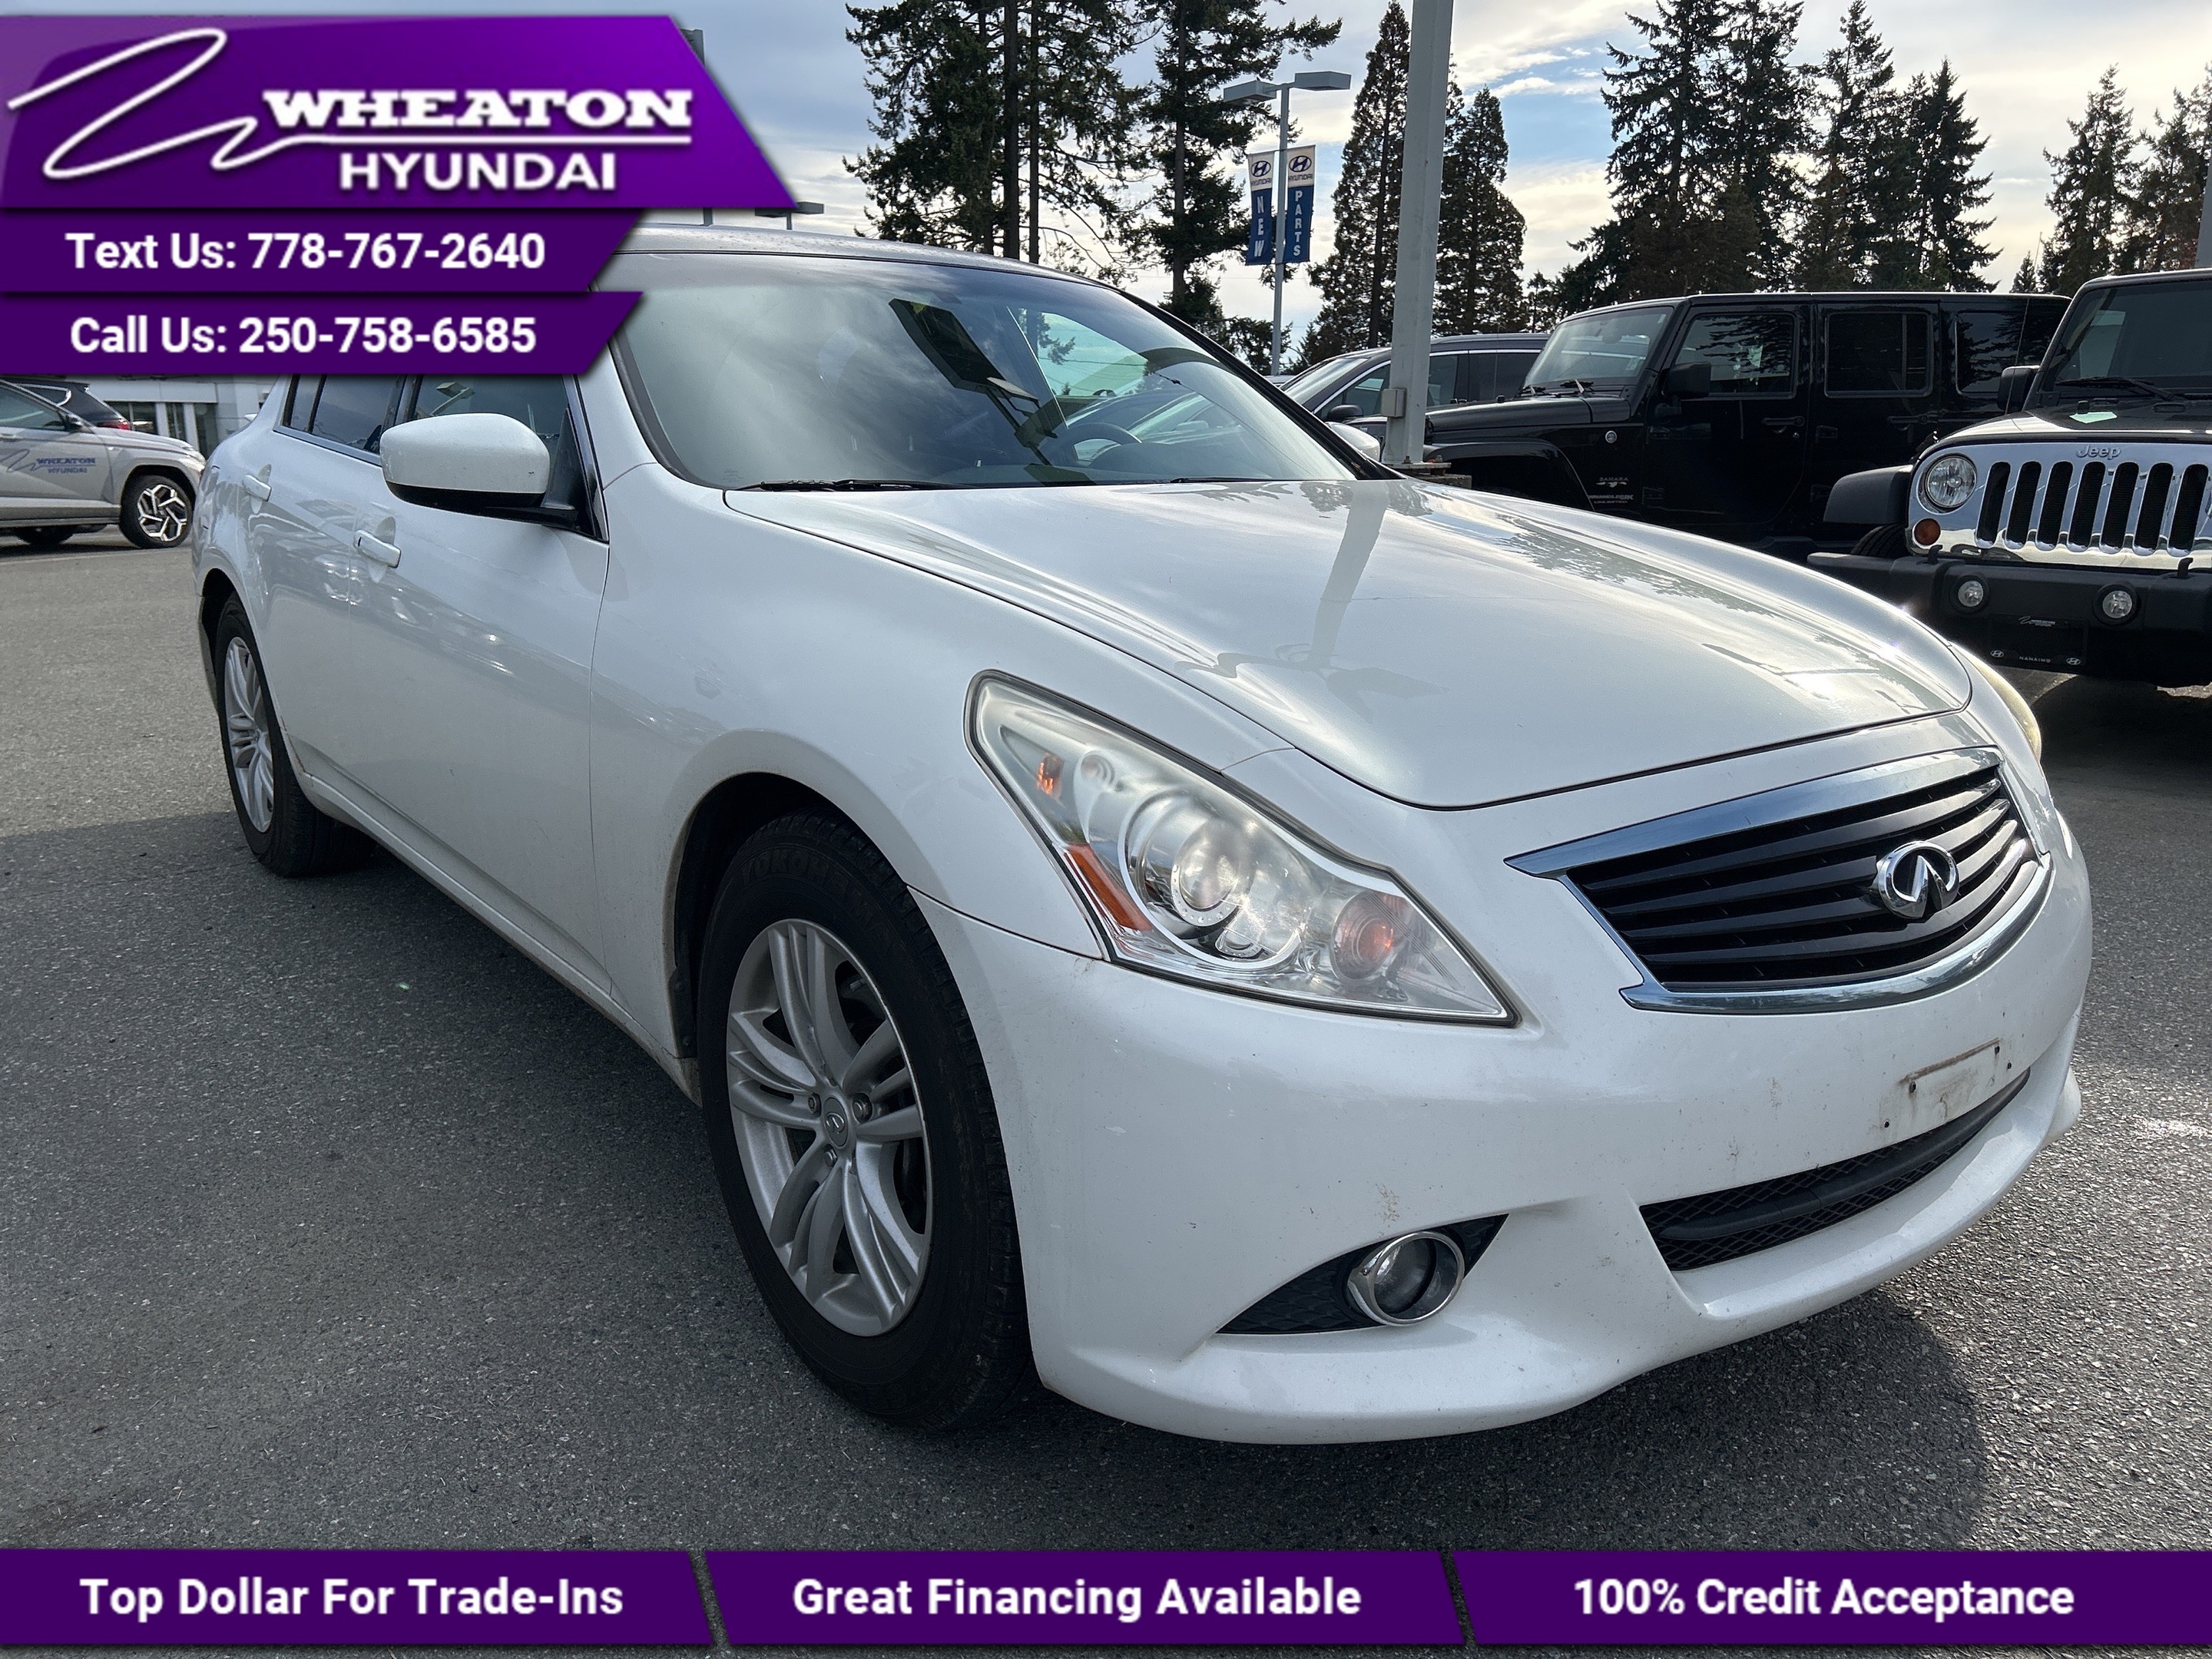 2013 Infiniti G37 Luxury, AWD, No Accidents, Trade in, Leather, Heat